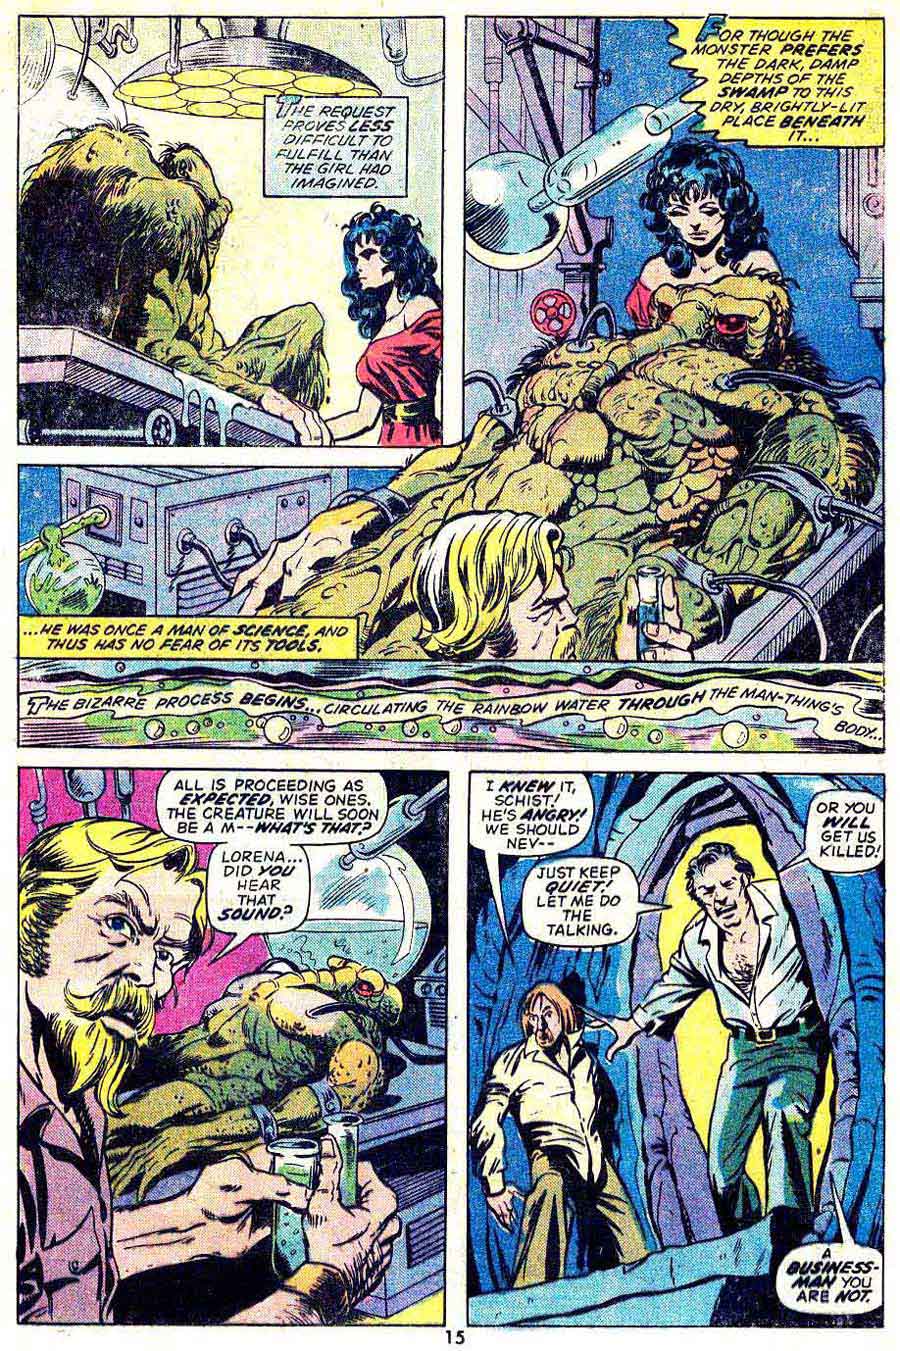 Man-Thing v1 #8 marvel 1970s bronze age comic book page art by Mike Ploog